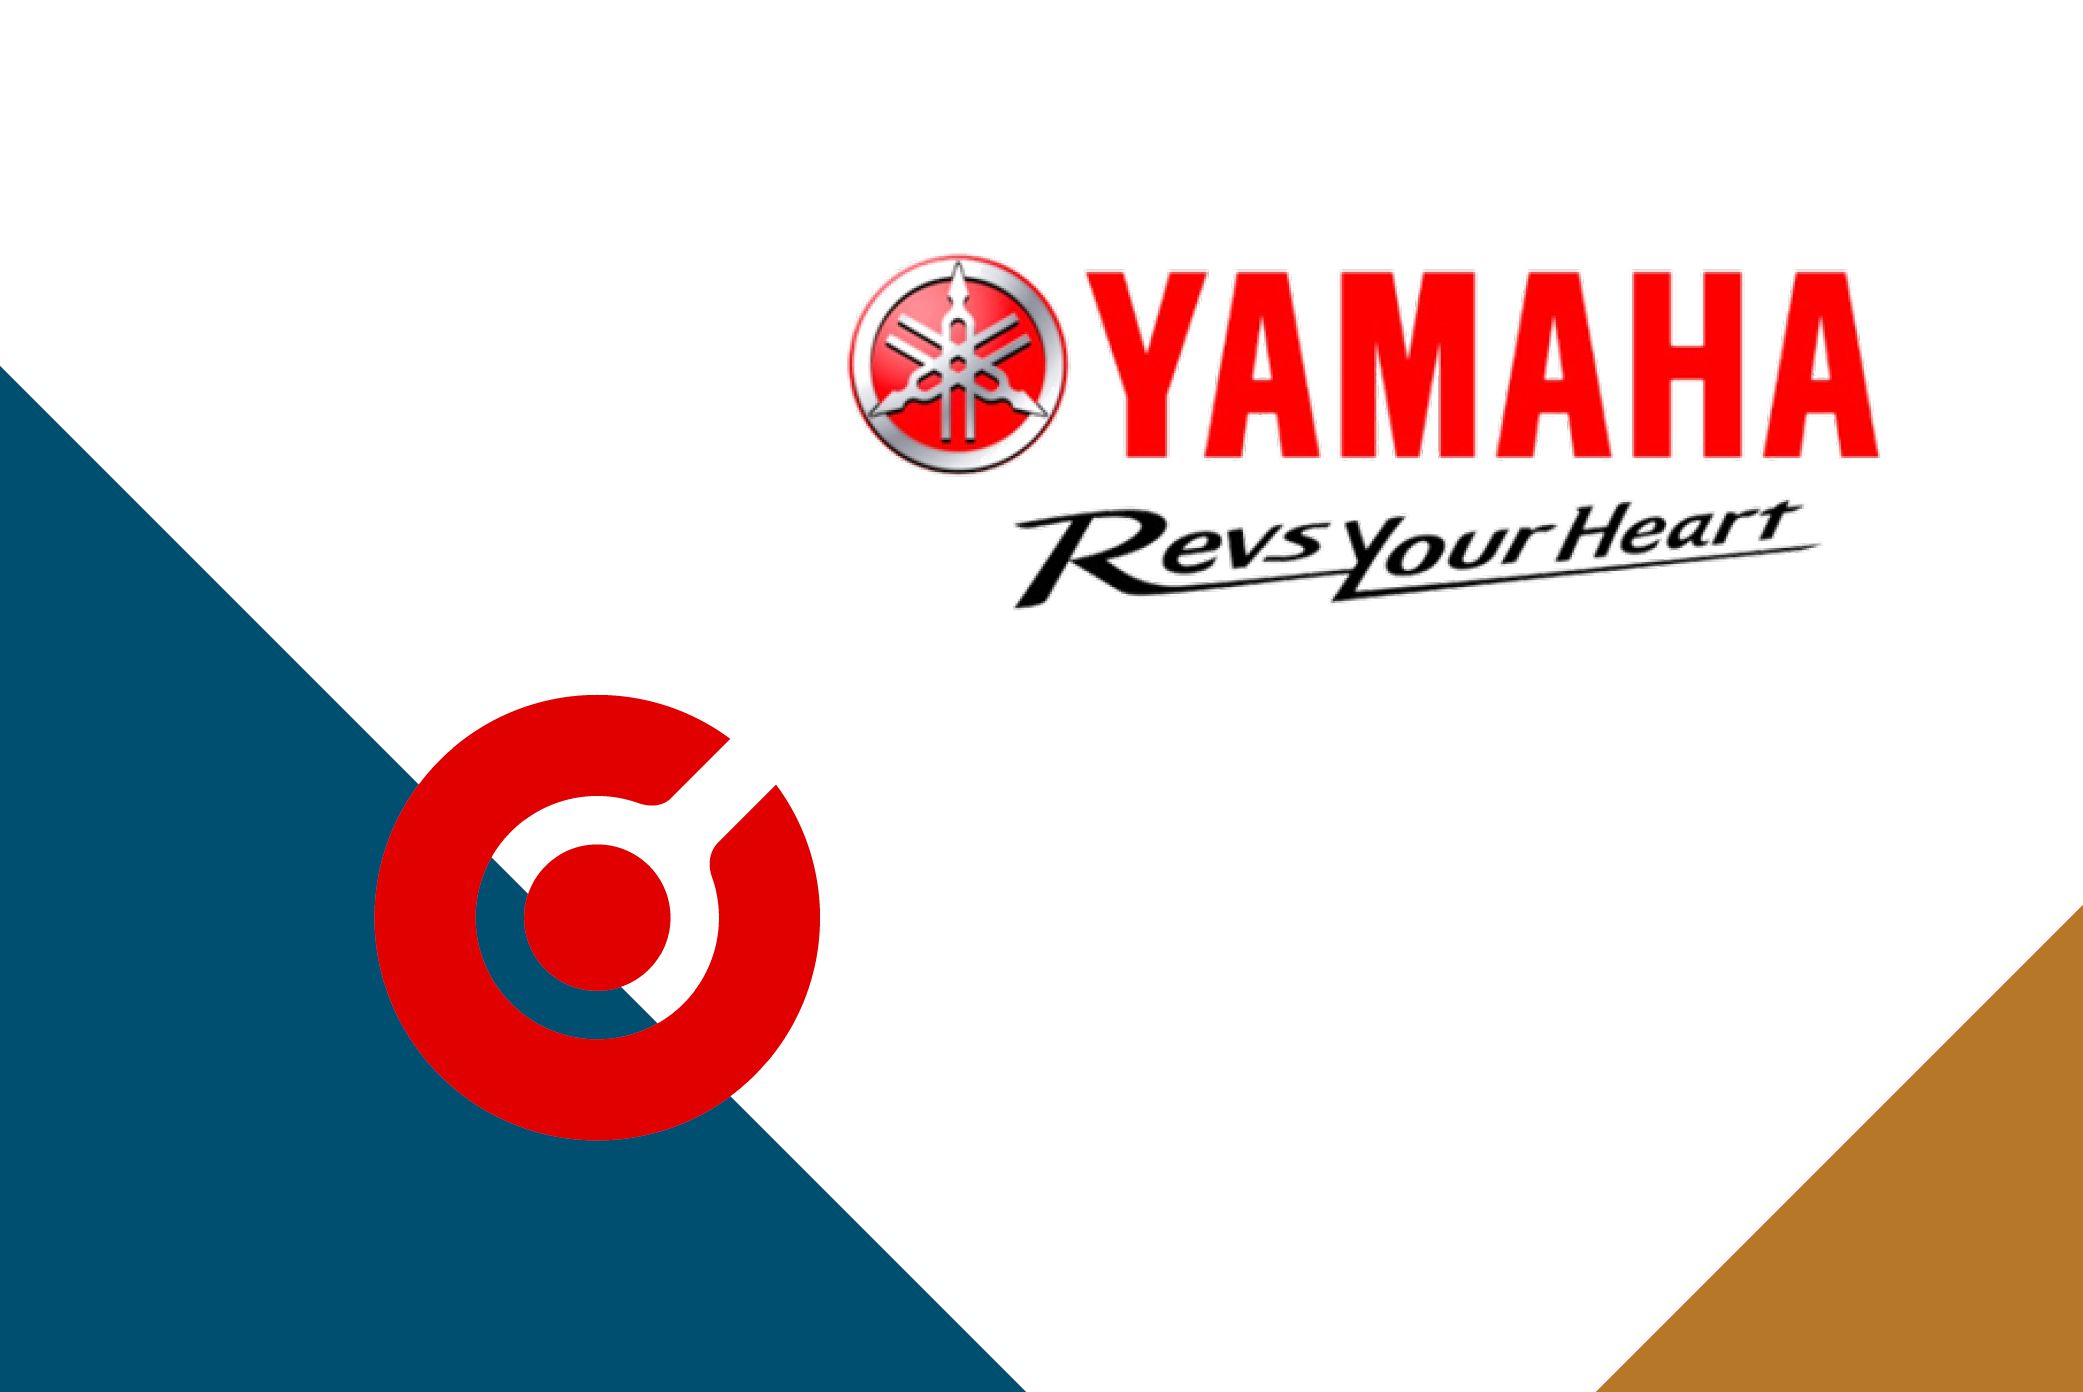 See YAMAHA SMT machinery at Productronica 2019